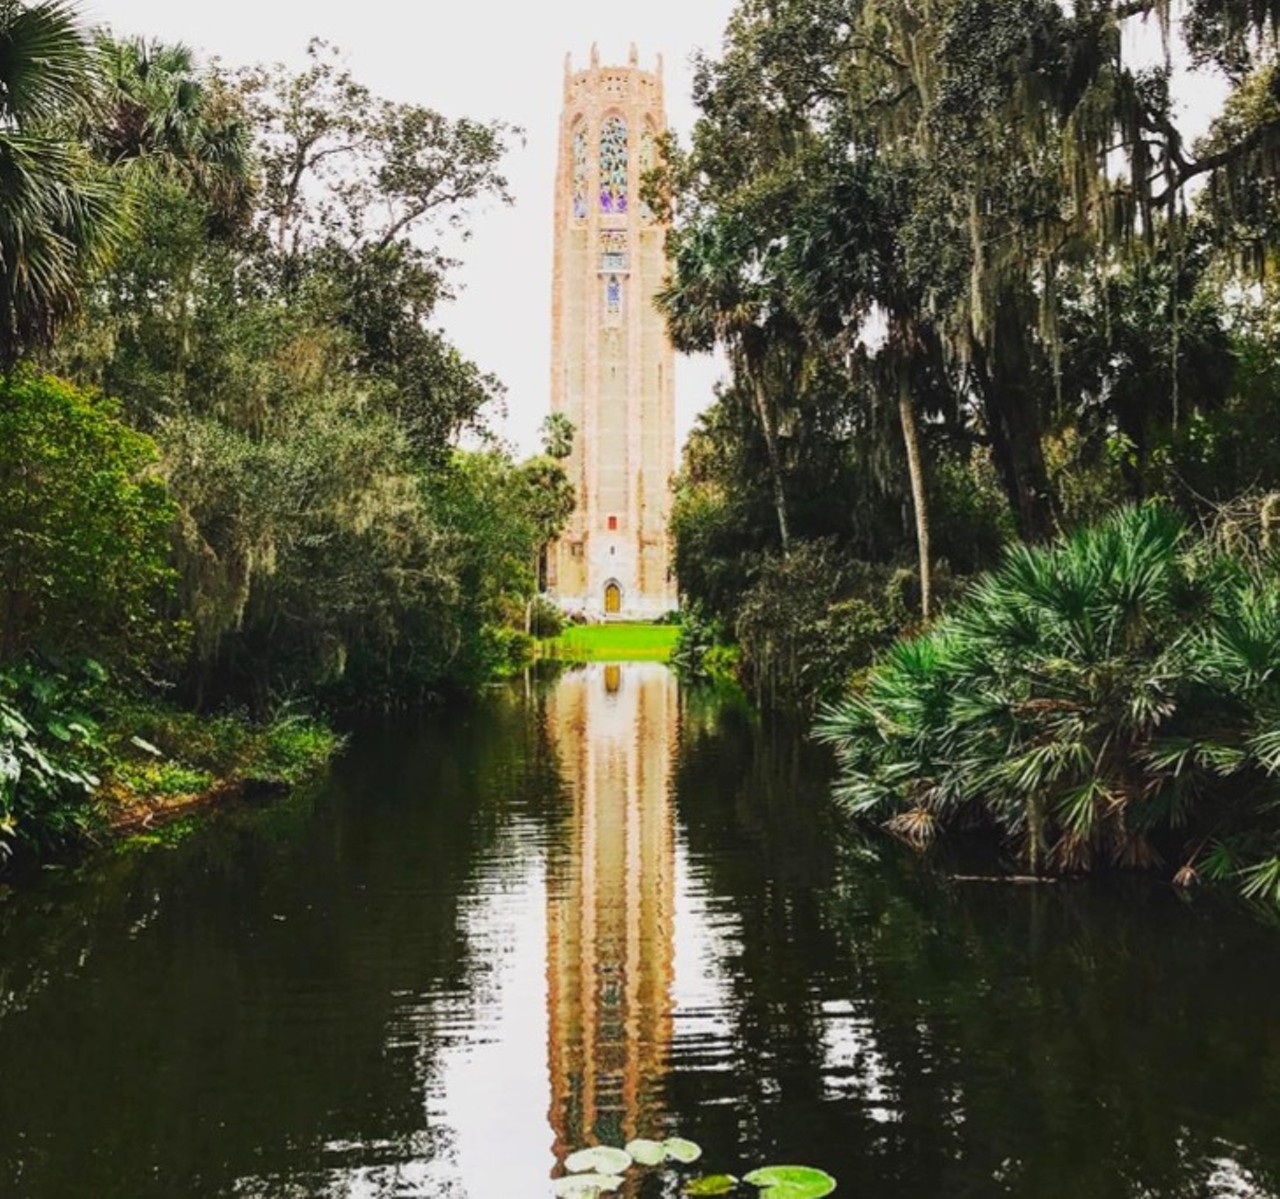 Bok Tower Gardens
1151 Tower Blvd, Lake Wales, FL, (863)-676-1408 
Estimated driving distance: 1 hour 9 minutes
Certainly worth visiting for the architecture alone, this little Florida gem can be found hidden away in Lake Wales, Florida. Along with their unique landmark, the &#145;Singing Tower,&#146; visitors can also enjoy bird watching, geocaching and trail hiking.
Photo via wanderlust/Instagram